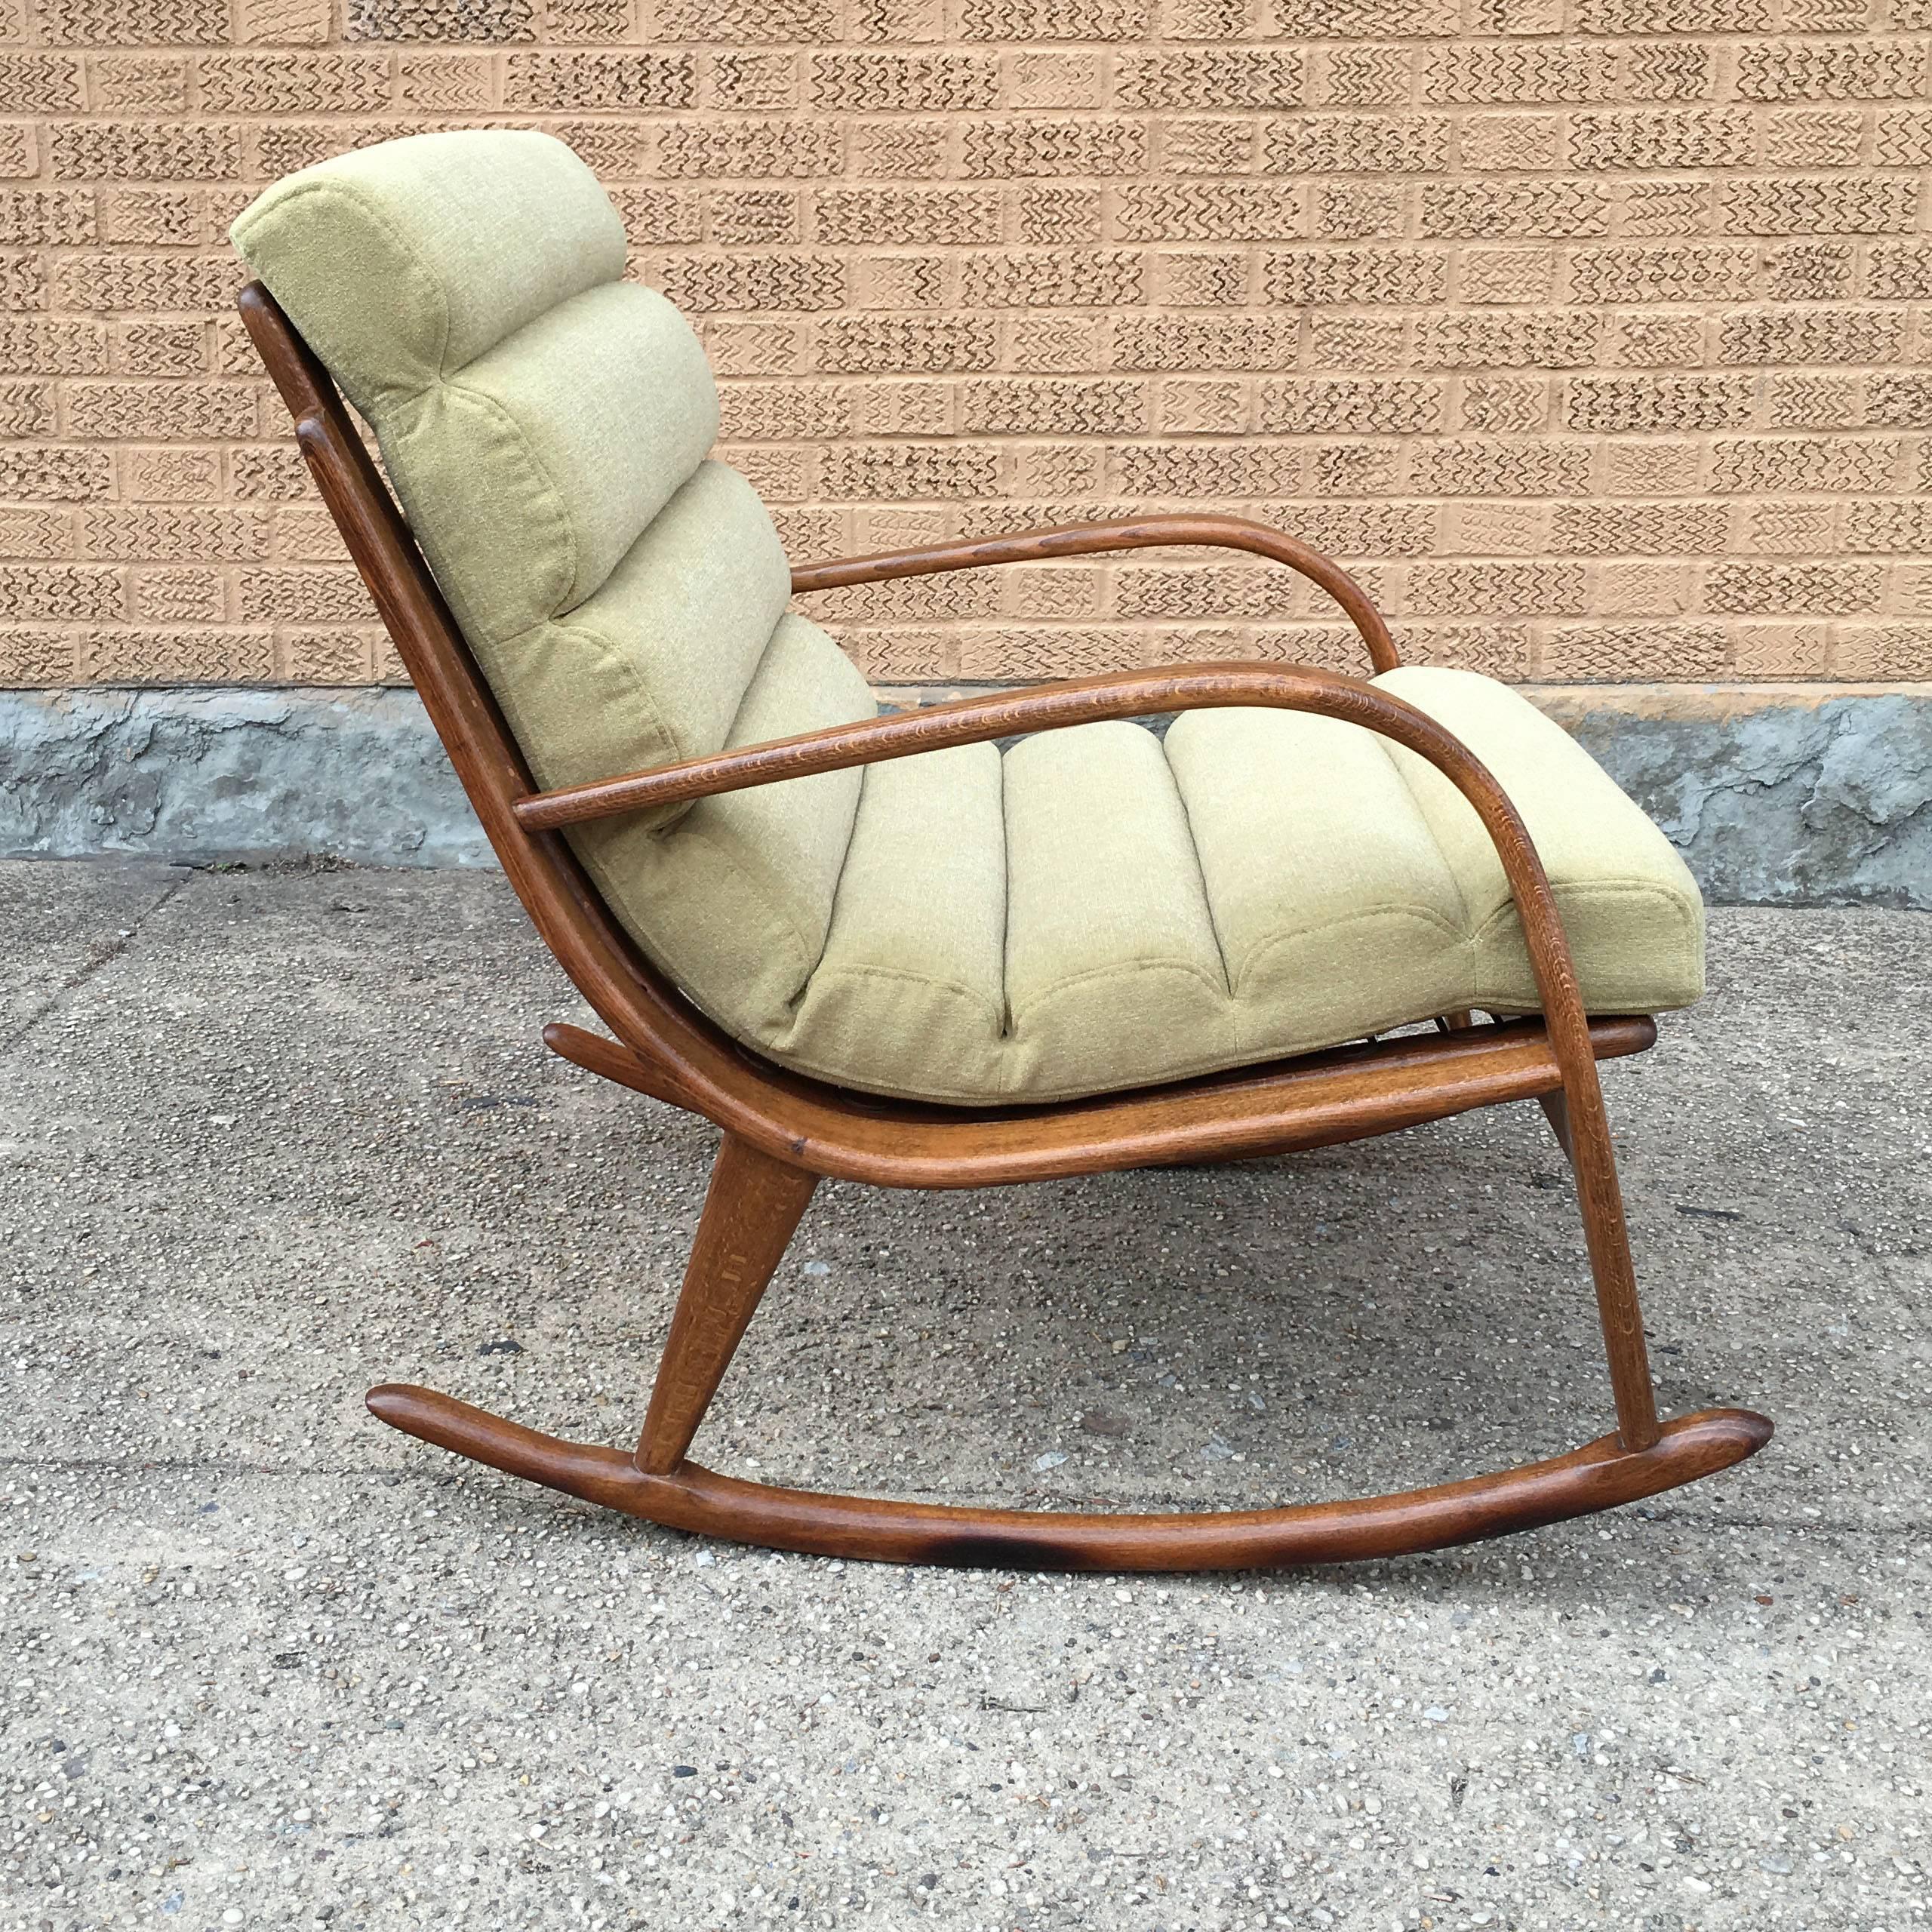 Extremely rare, Danish modern bent maple wood, rocking chair with custom, scalloped, chenille cushion.